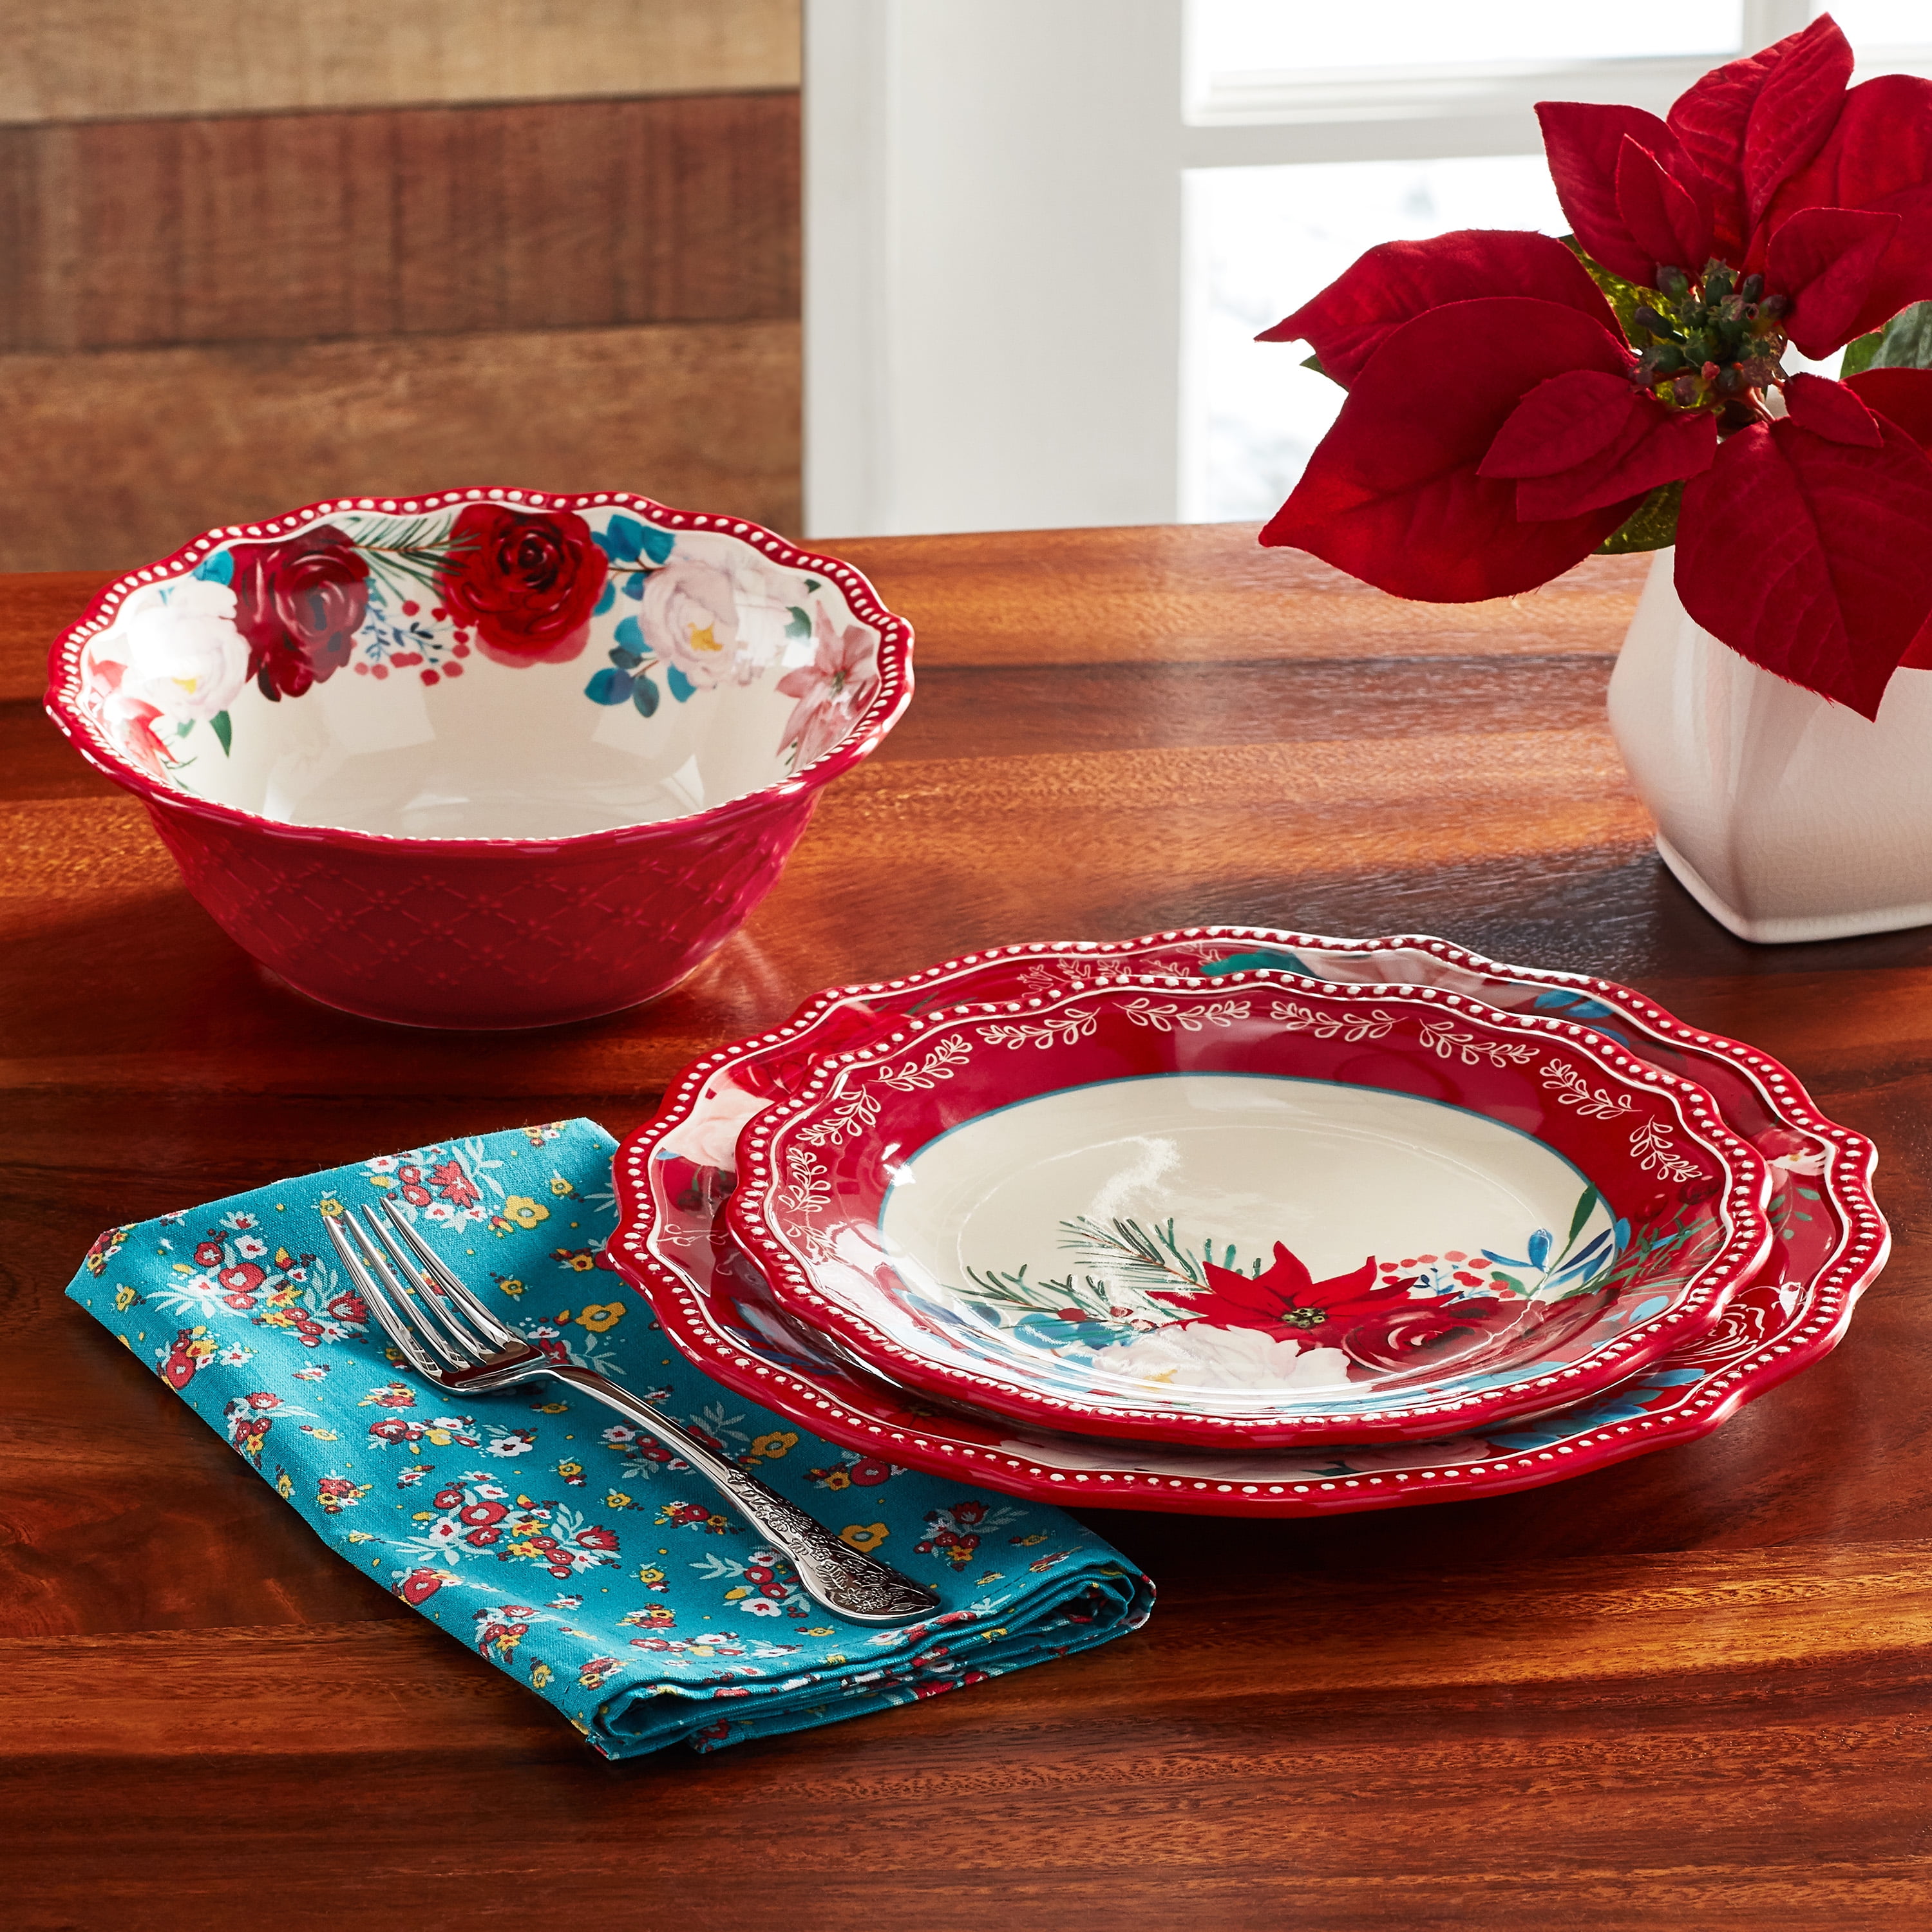 50% Off The Pioneer Woman Holiday Kitchen Items at Walmart.com